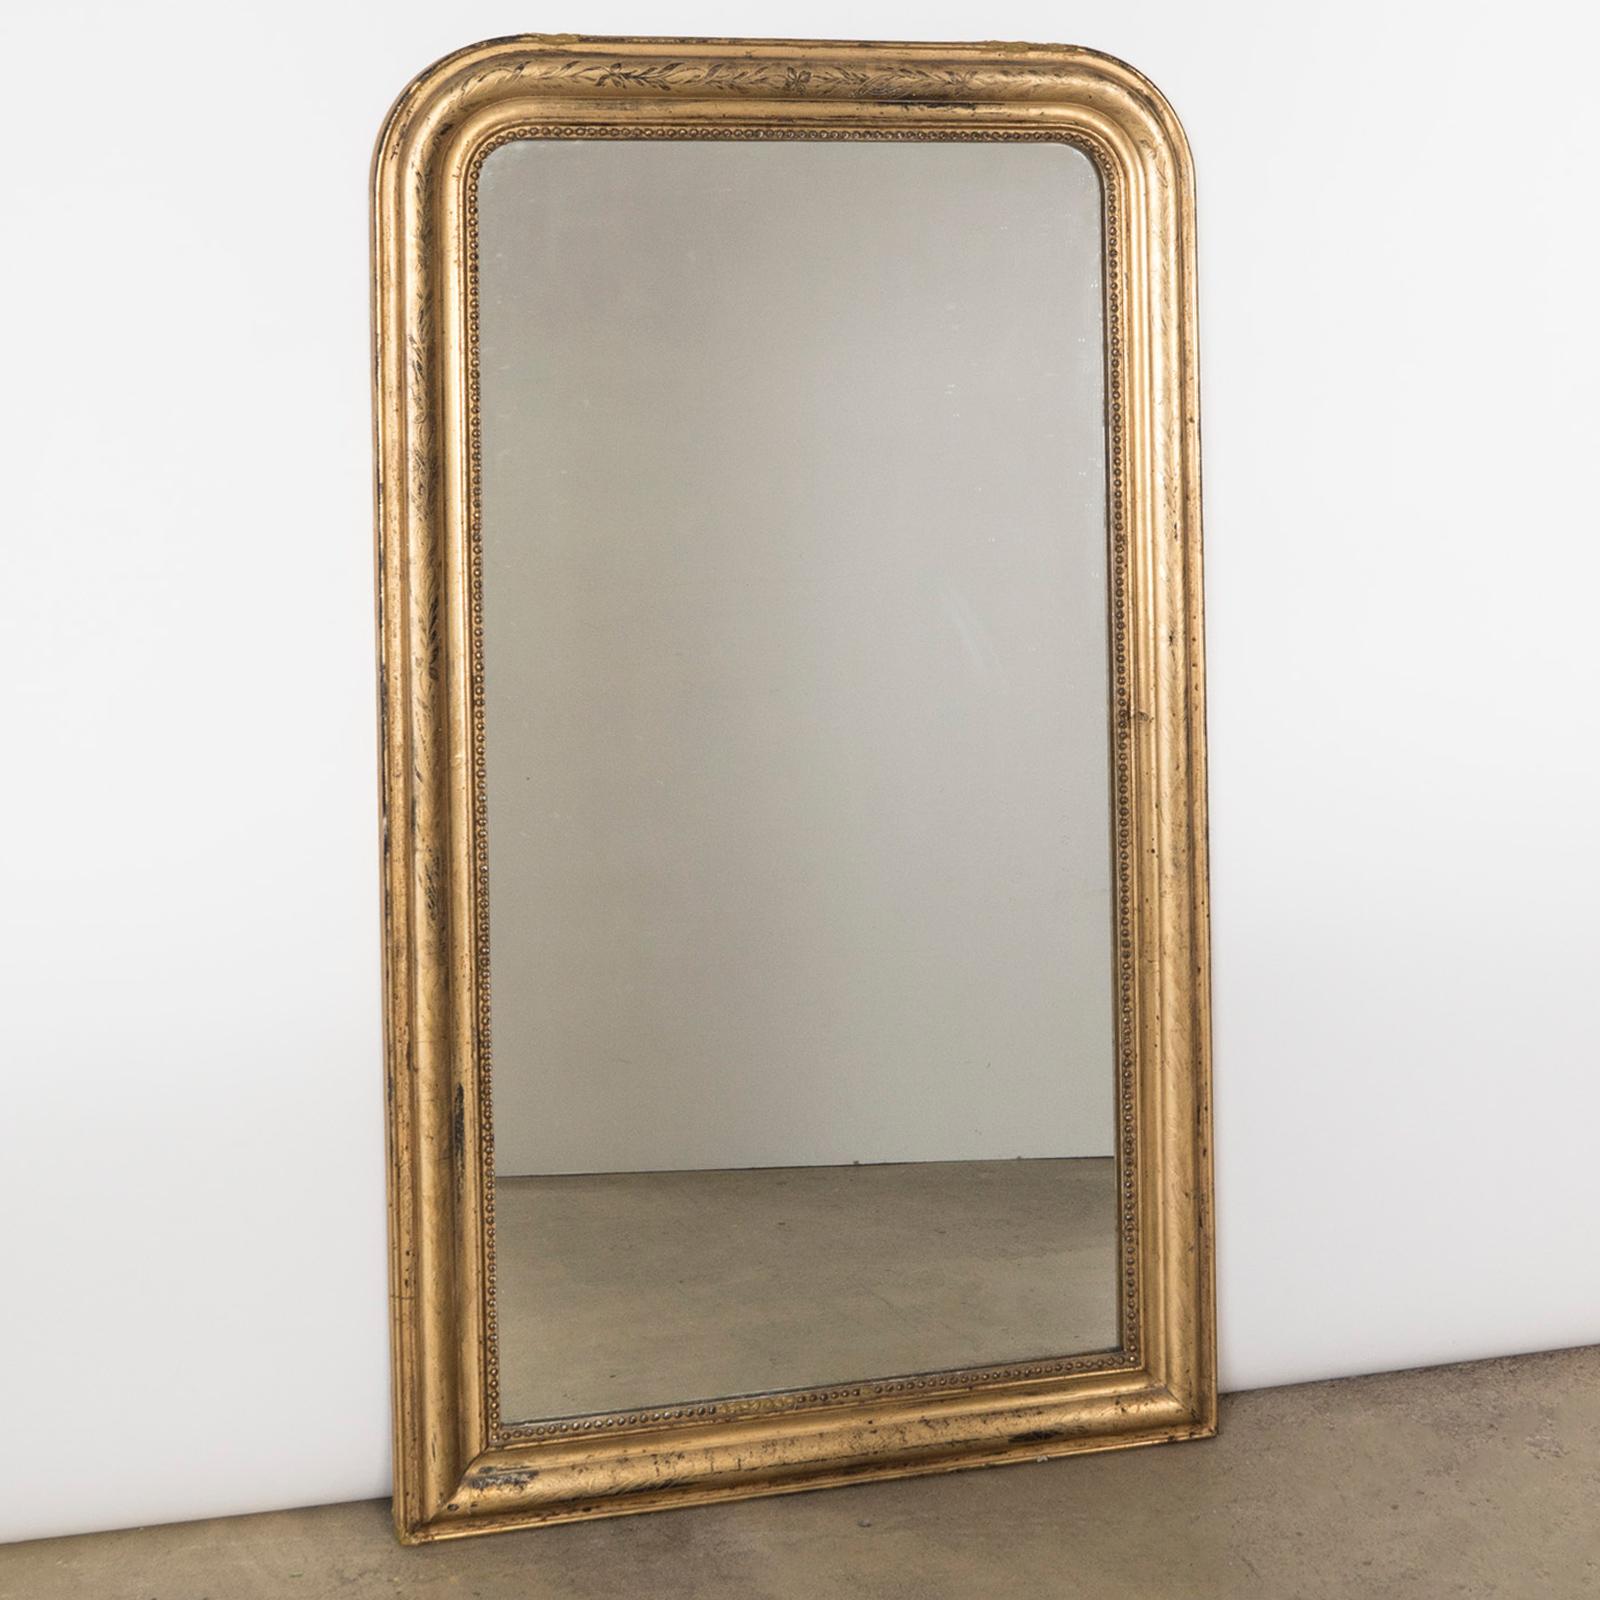 Antique French 19th century Louis Philippe style gold gilt mirror intricately etched with an intertwining design of ivy leaves and flowers and its inner rim edged with a classic 'string of pearls' motif.

This beautiful antique French gold gilt